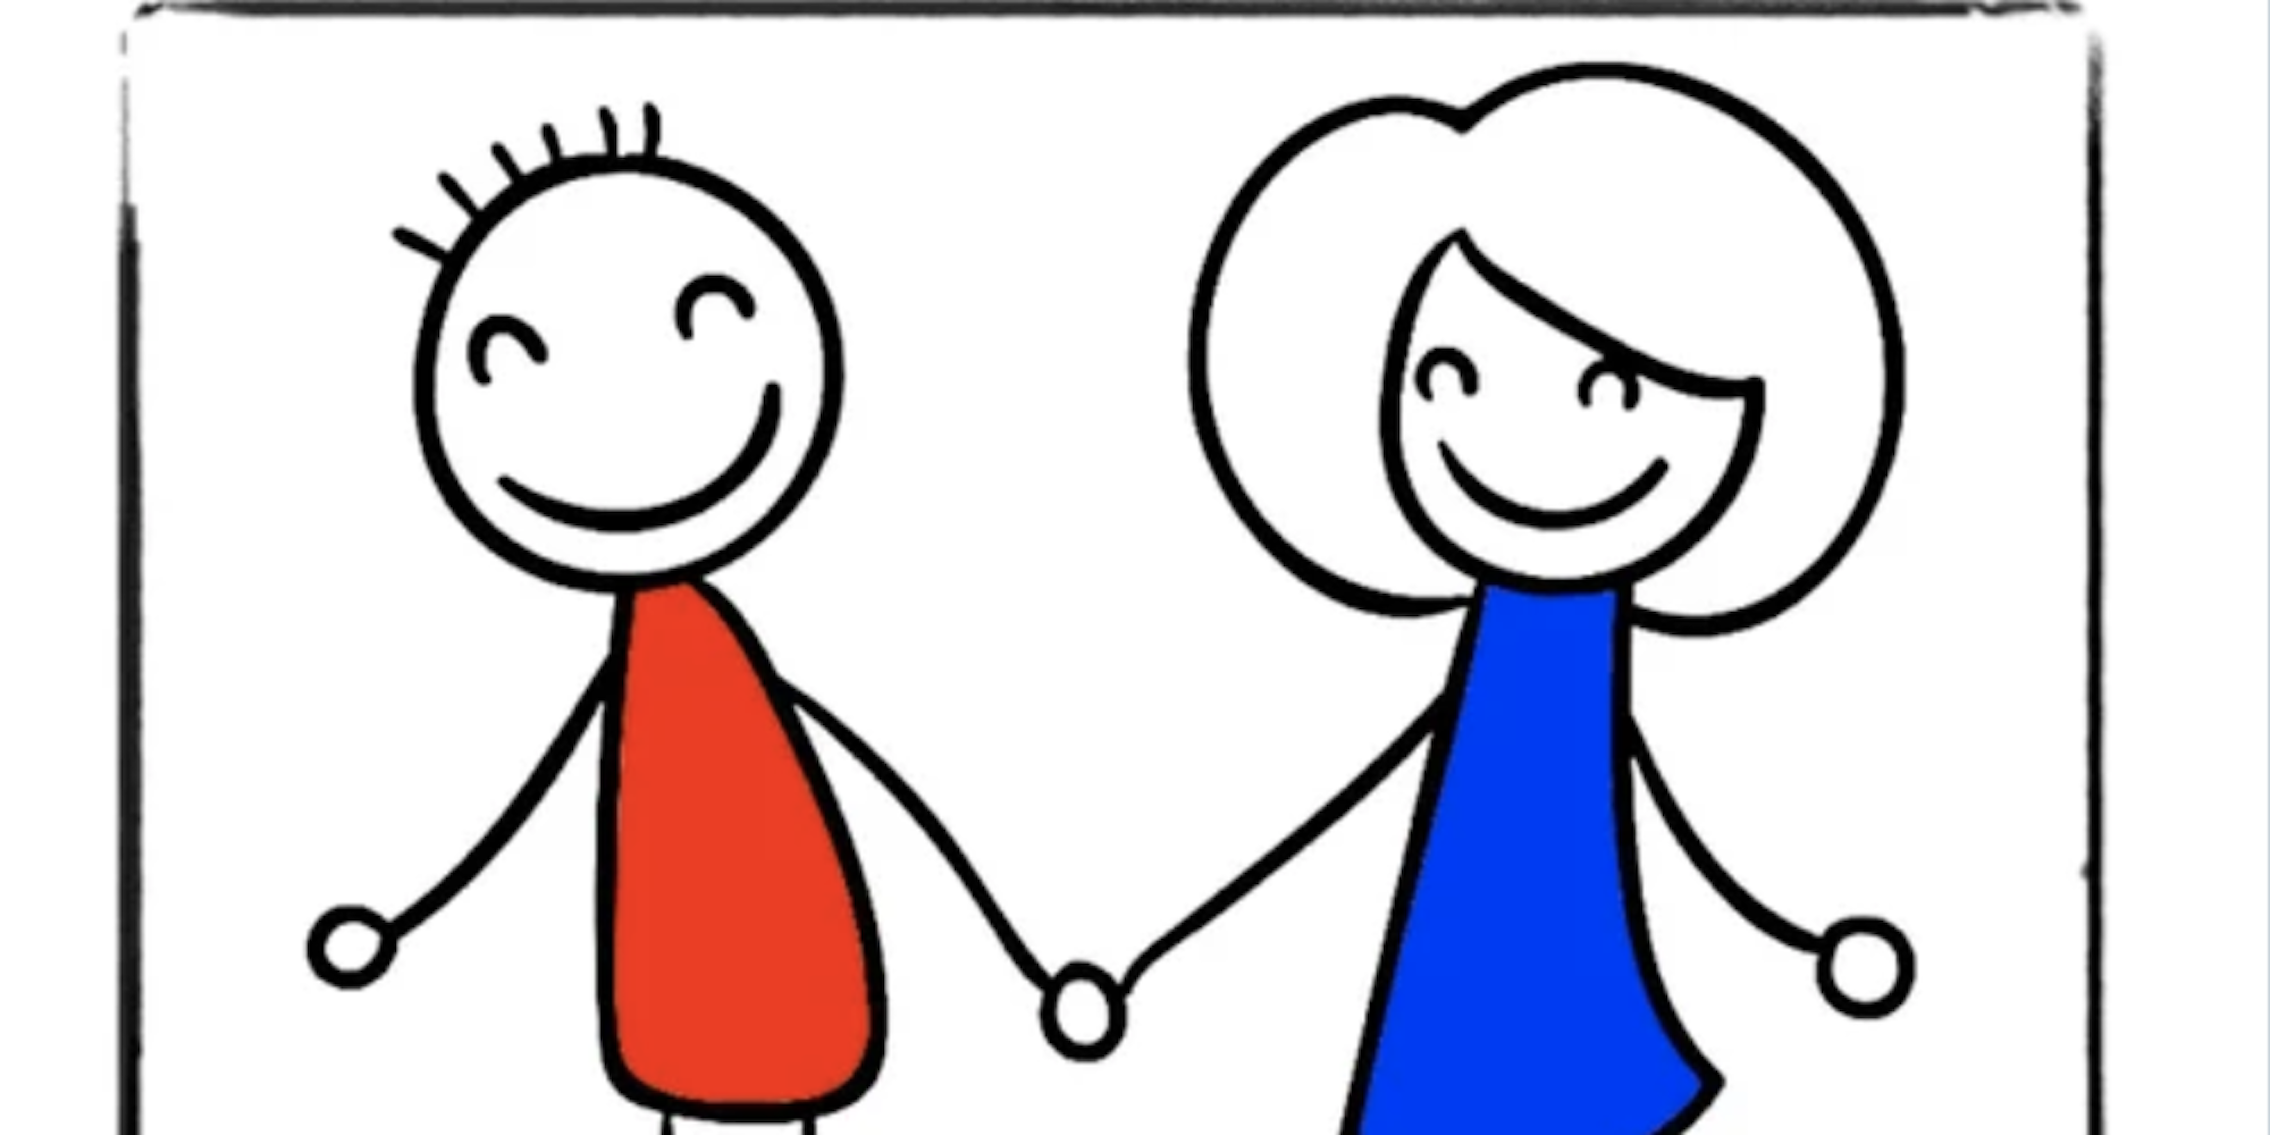 A male stick figure in red and a female stick figure in blue hold hands